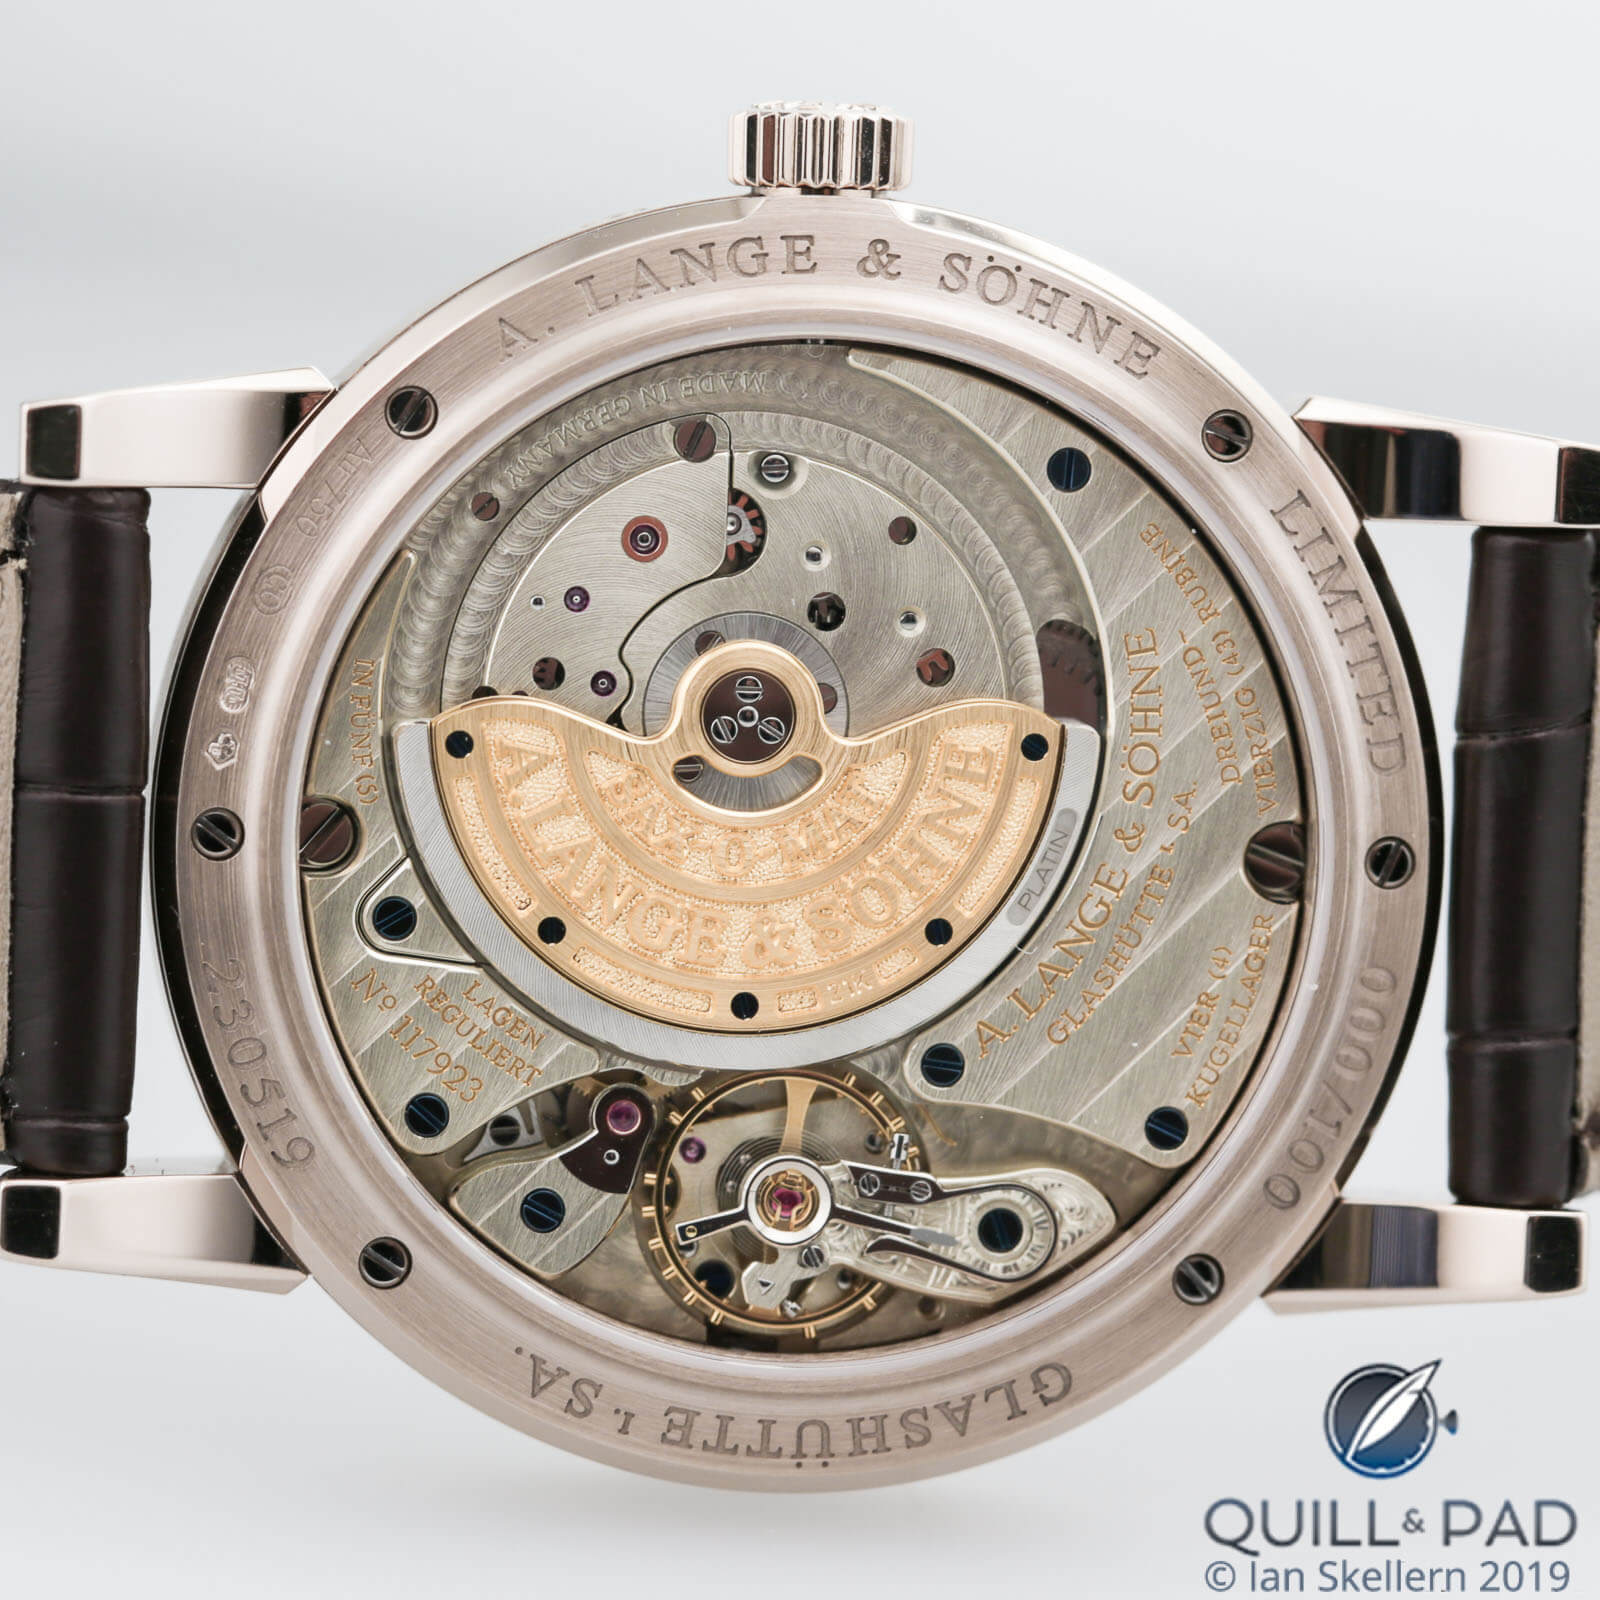 View through the display back to the movement of the A. Lange & Söhne Saxonia Langematik 